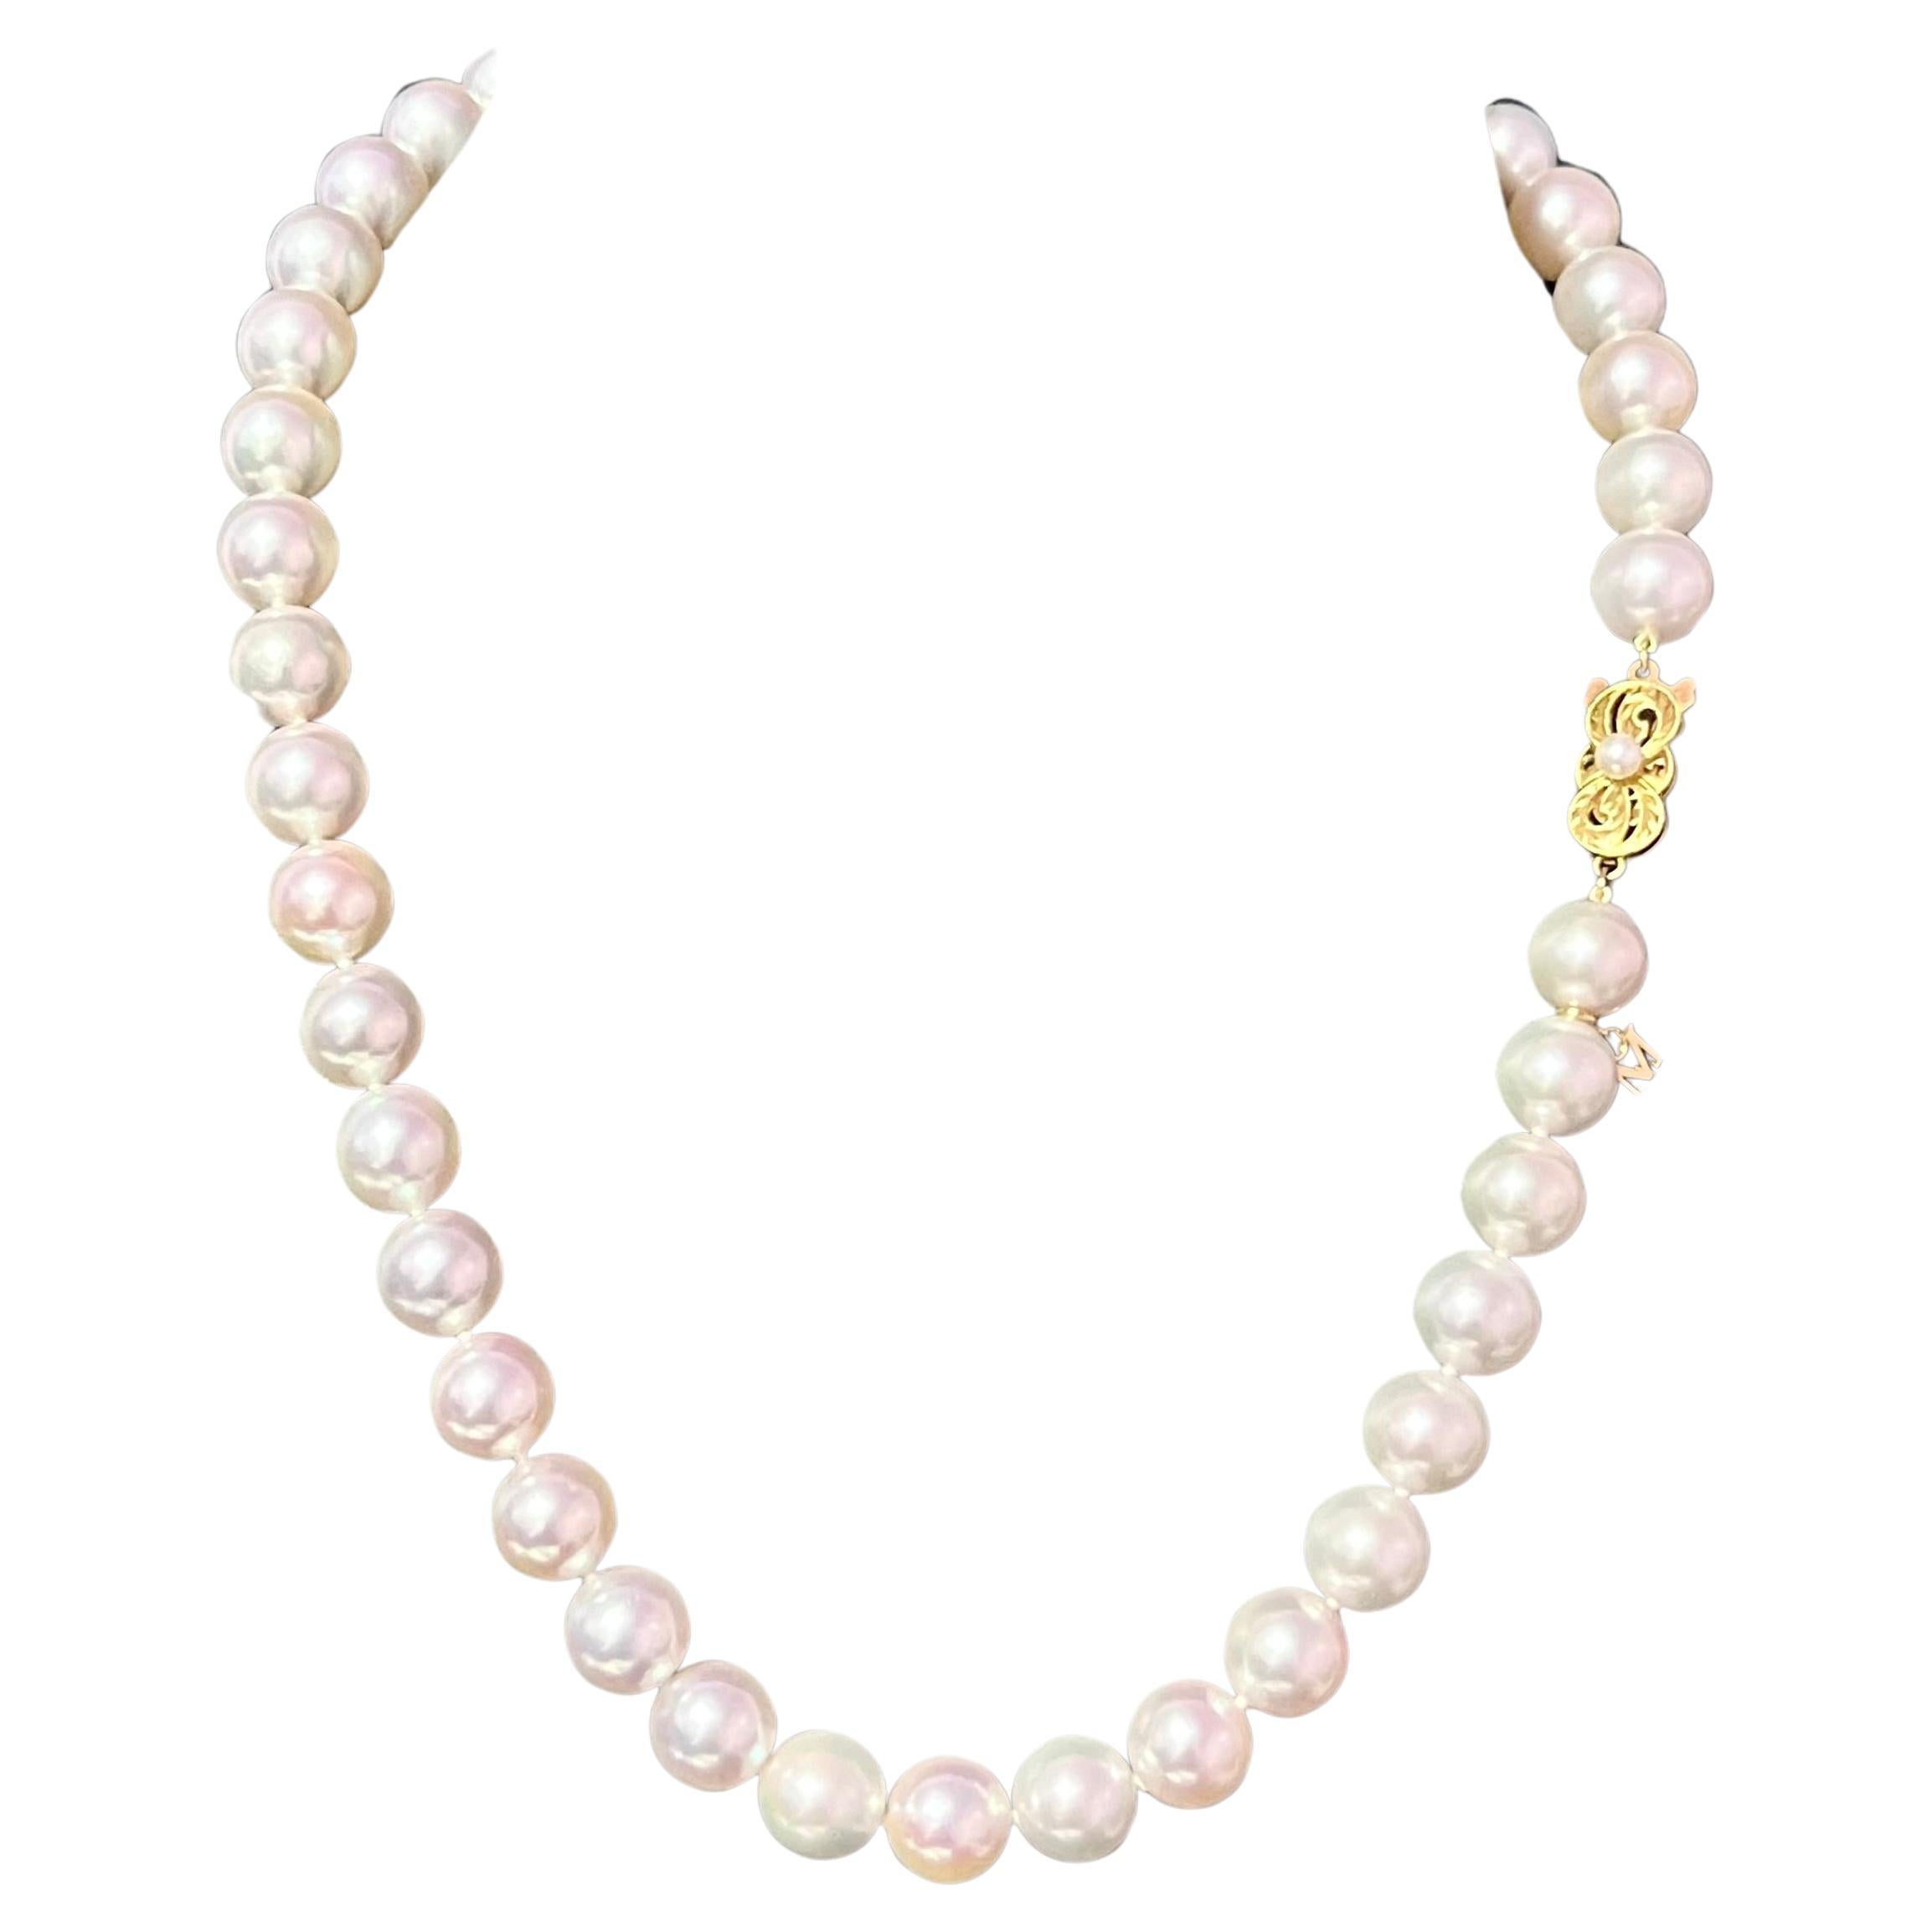 Mikimoto Estate Akoya Pearl Necklace 18" 18k Y Gold 10 mm Certified